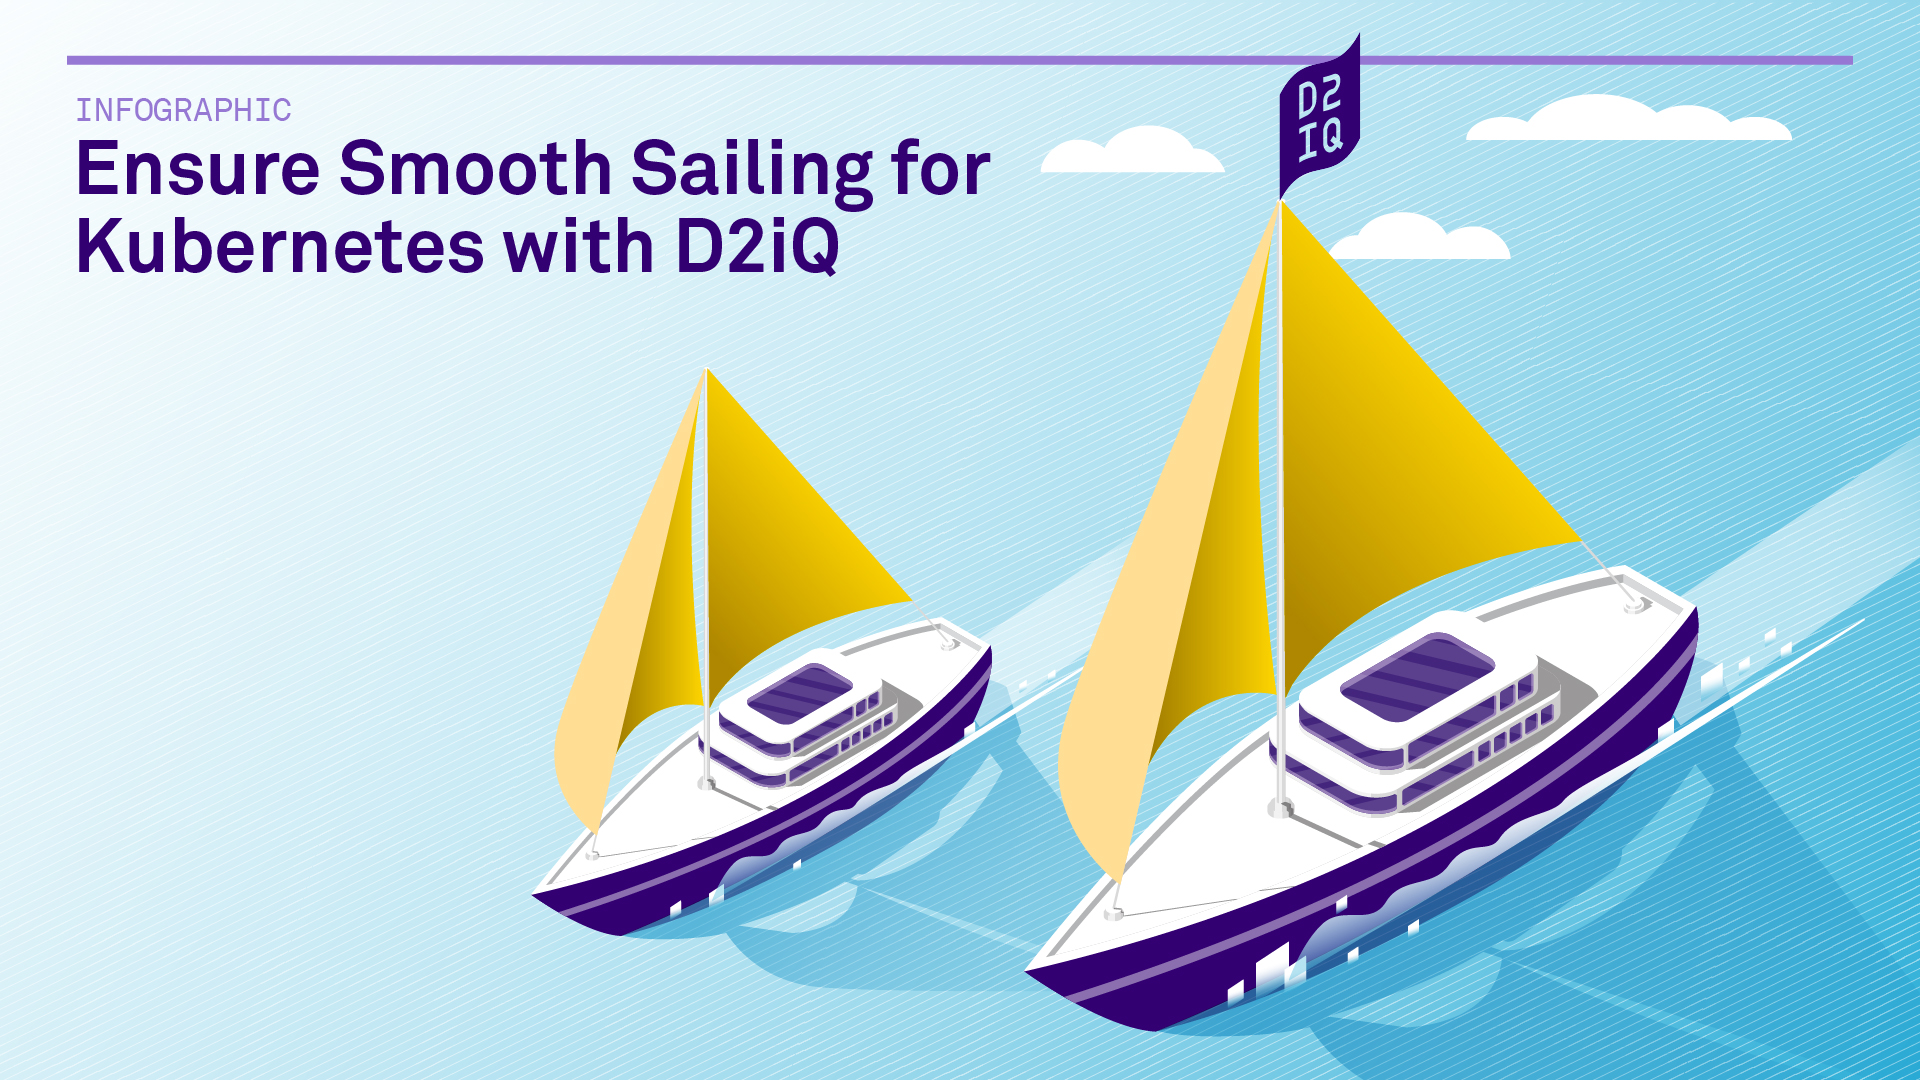 Ensure Smooth Sailing for Kubernetes with D2iQ